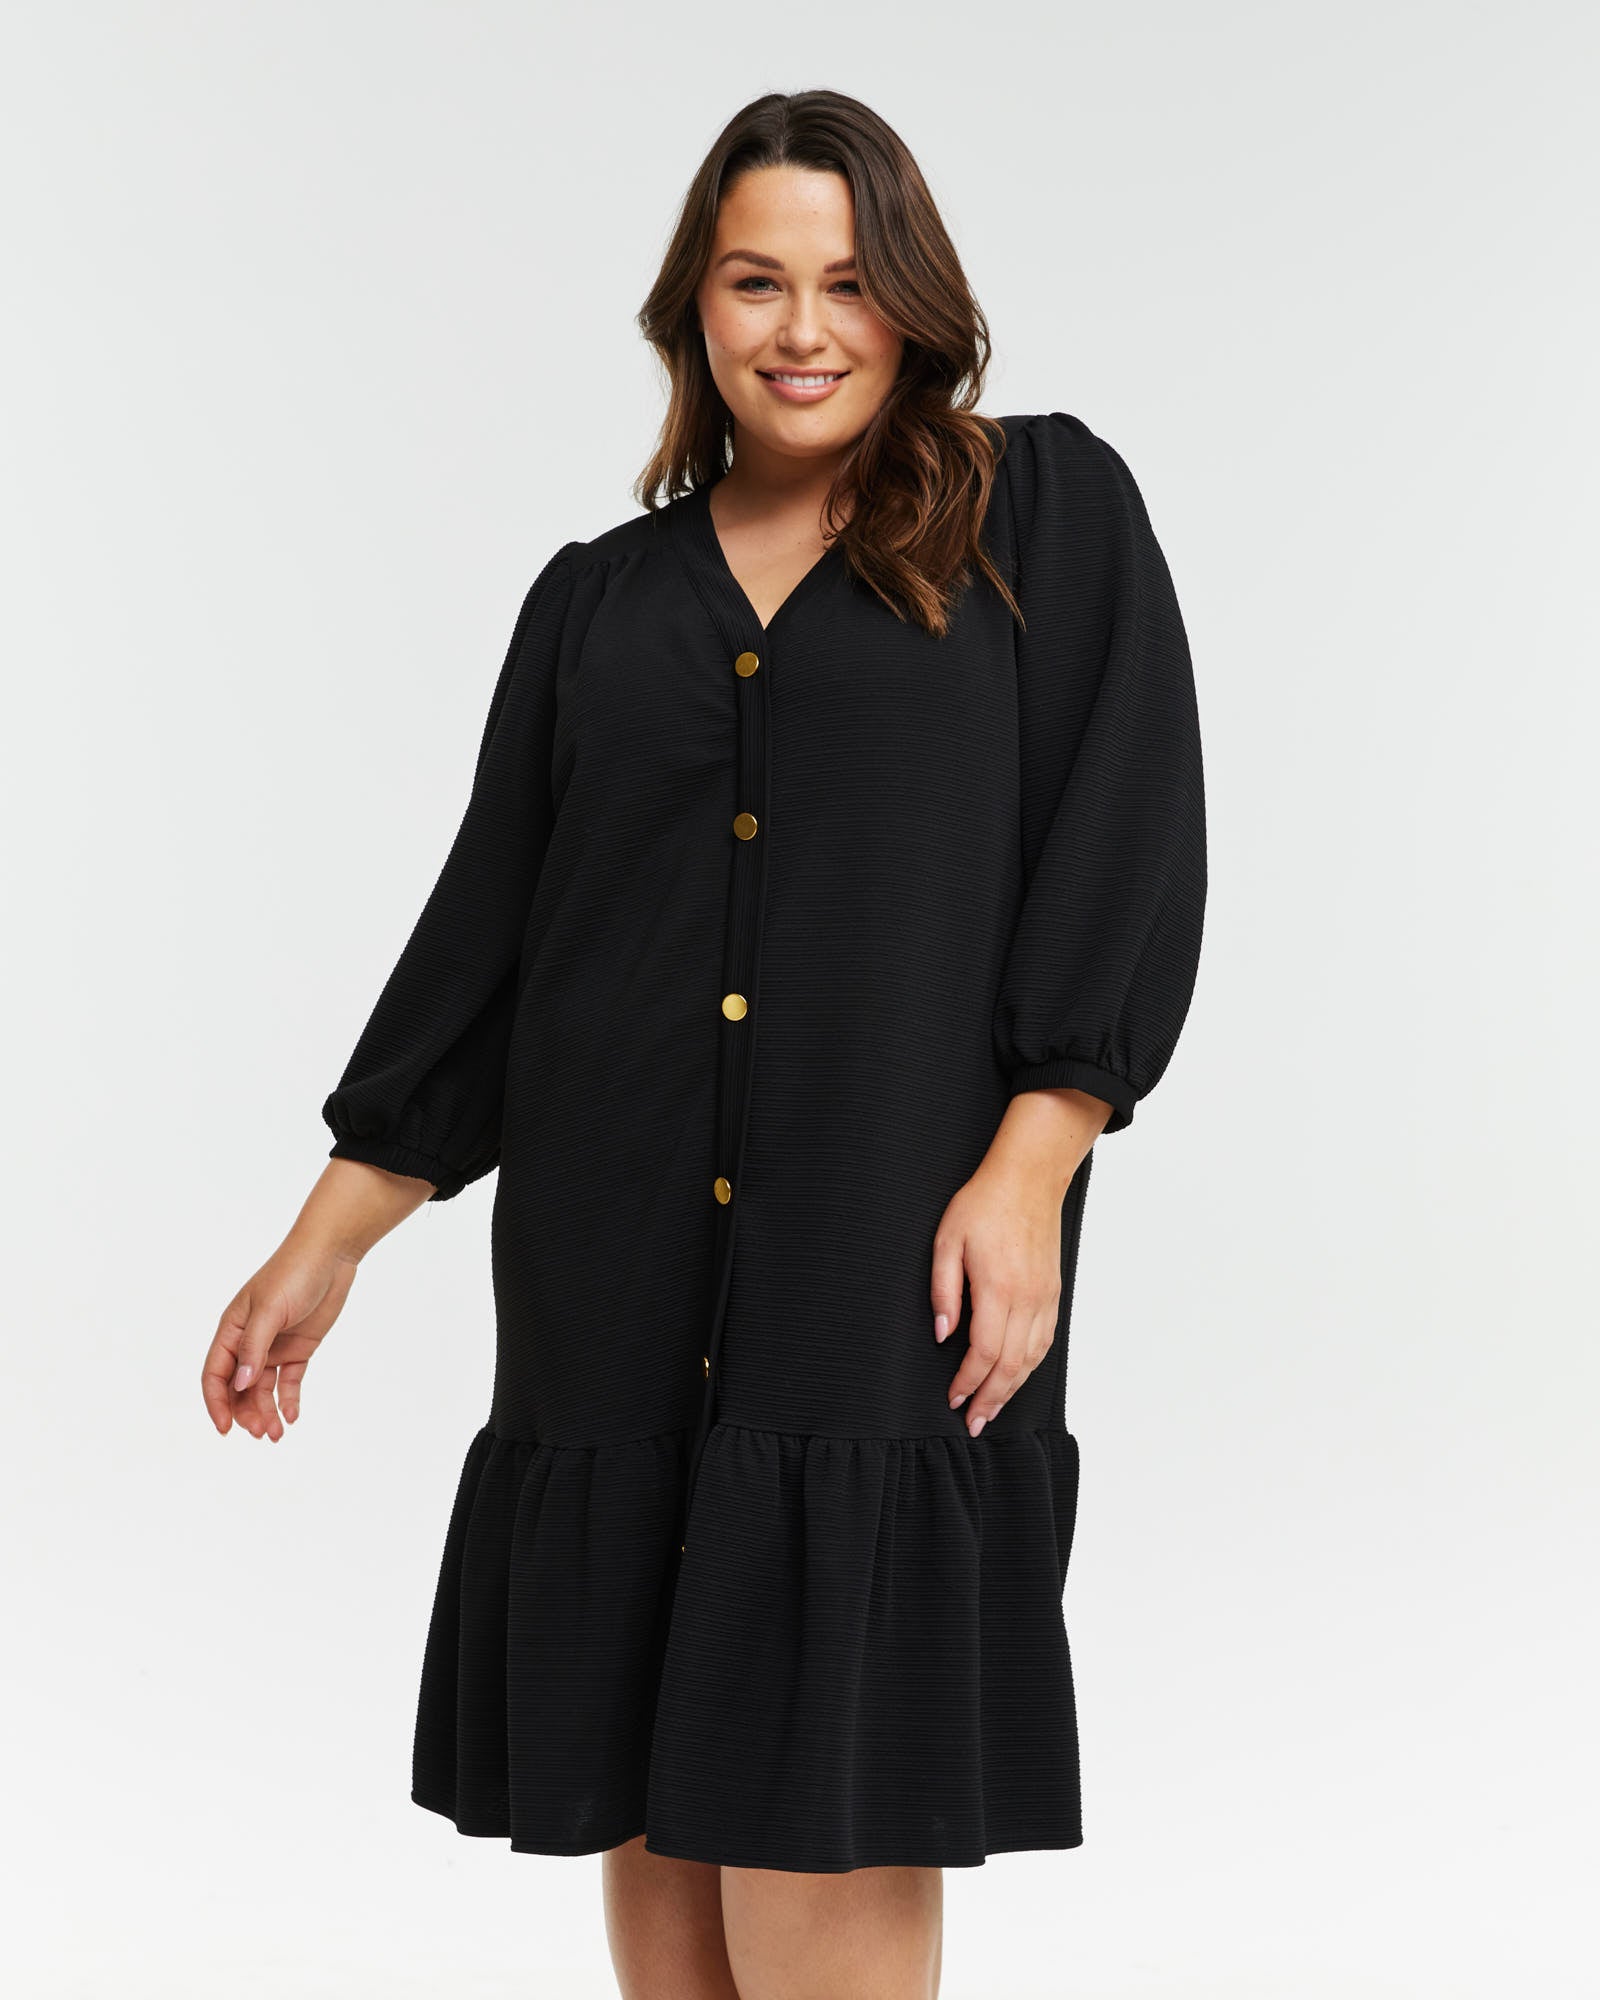 A plus size woman wearing the Elissa Dress, a versatile black ruffle sleeved dress with textured knit fabric.